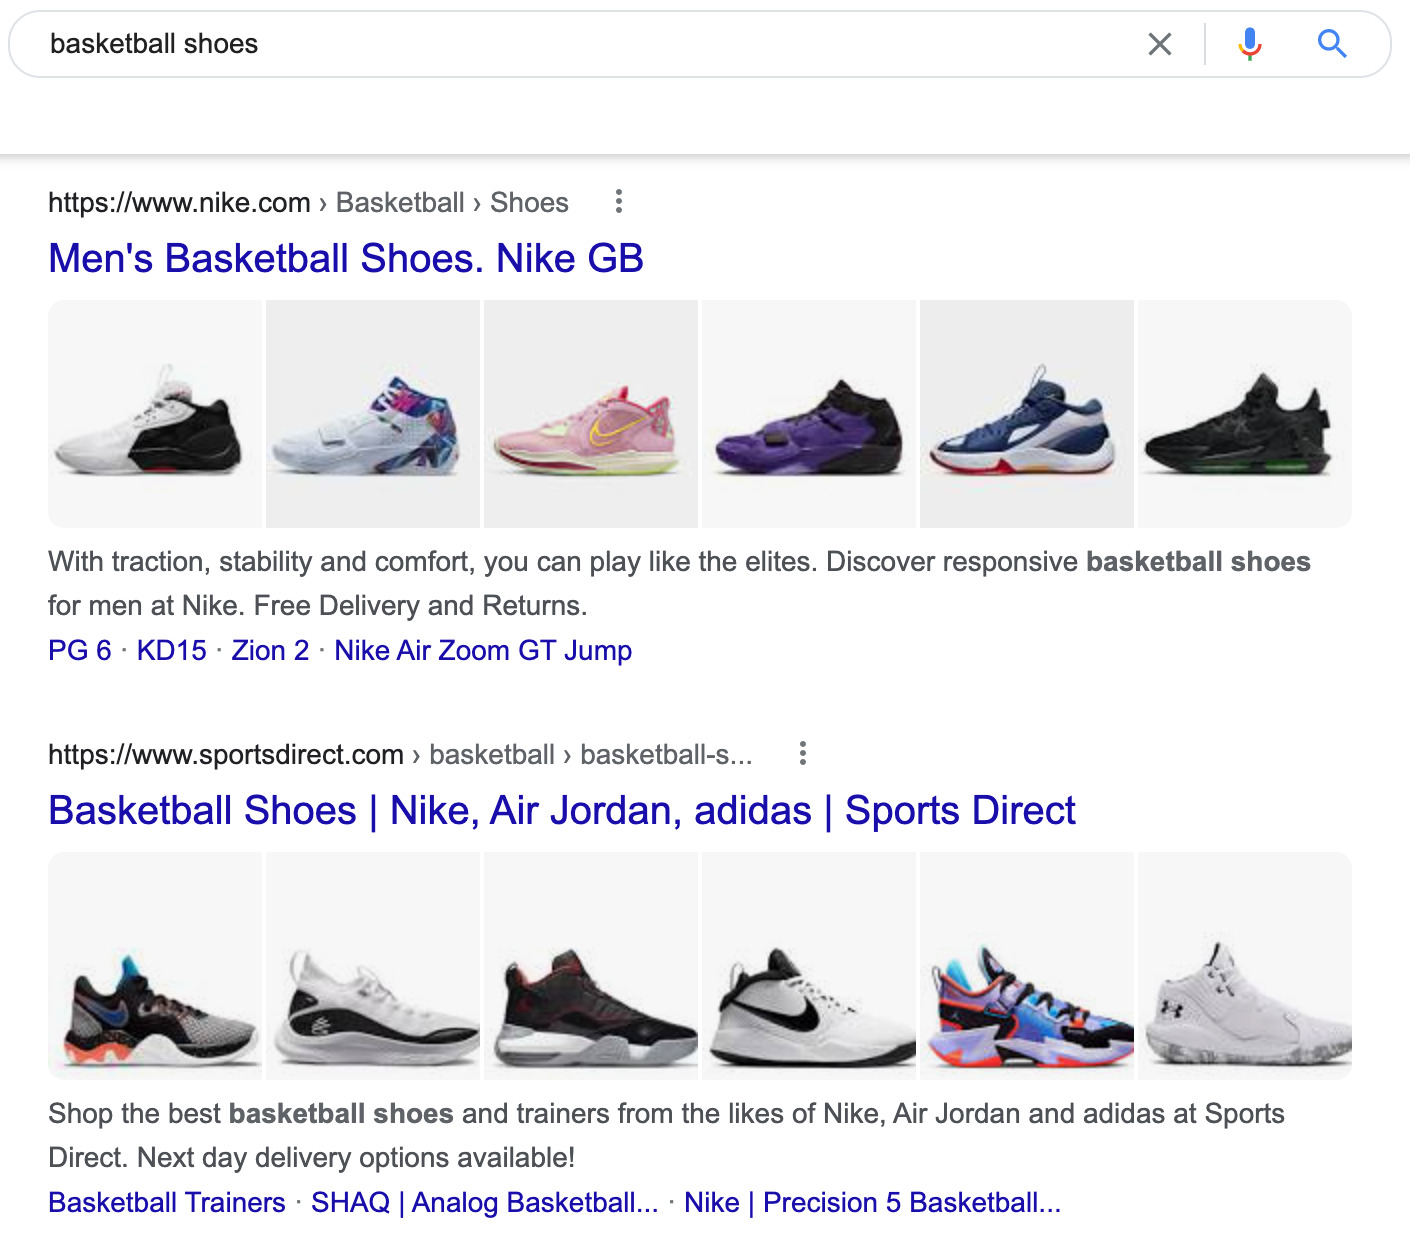 Search results for the query, "basketball shoes"
